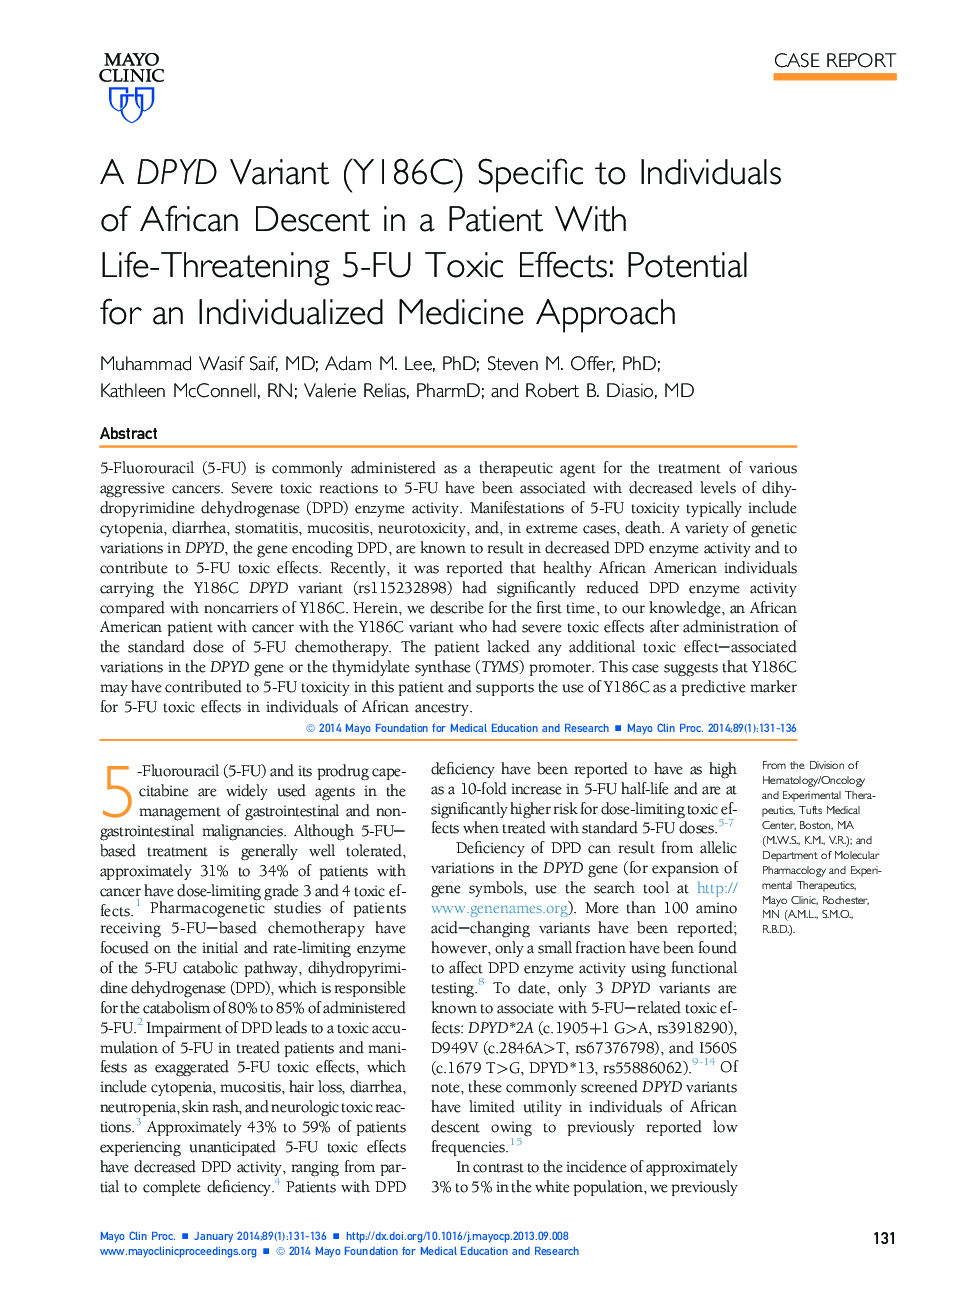 A DPYD Variant (Y186C) Specific to Individuals of African Descent in a Patient With Life-Threatening 5-FU Toxic Effects: Potential for an Individualized Medicine Approach